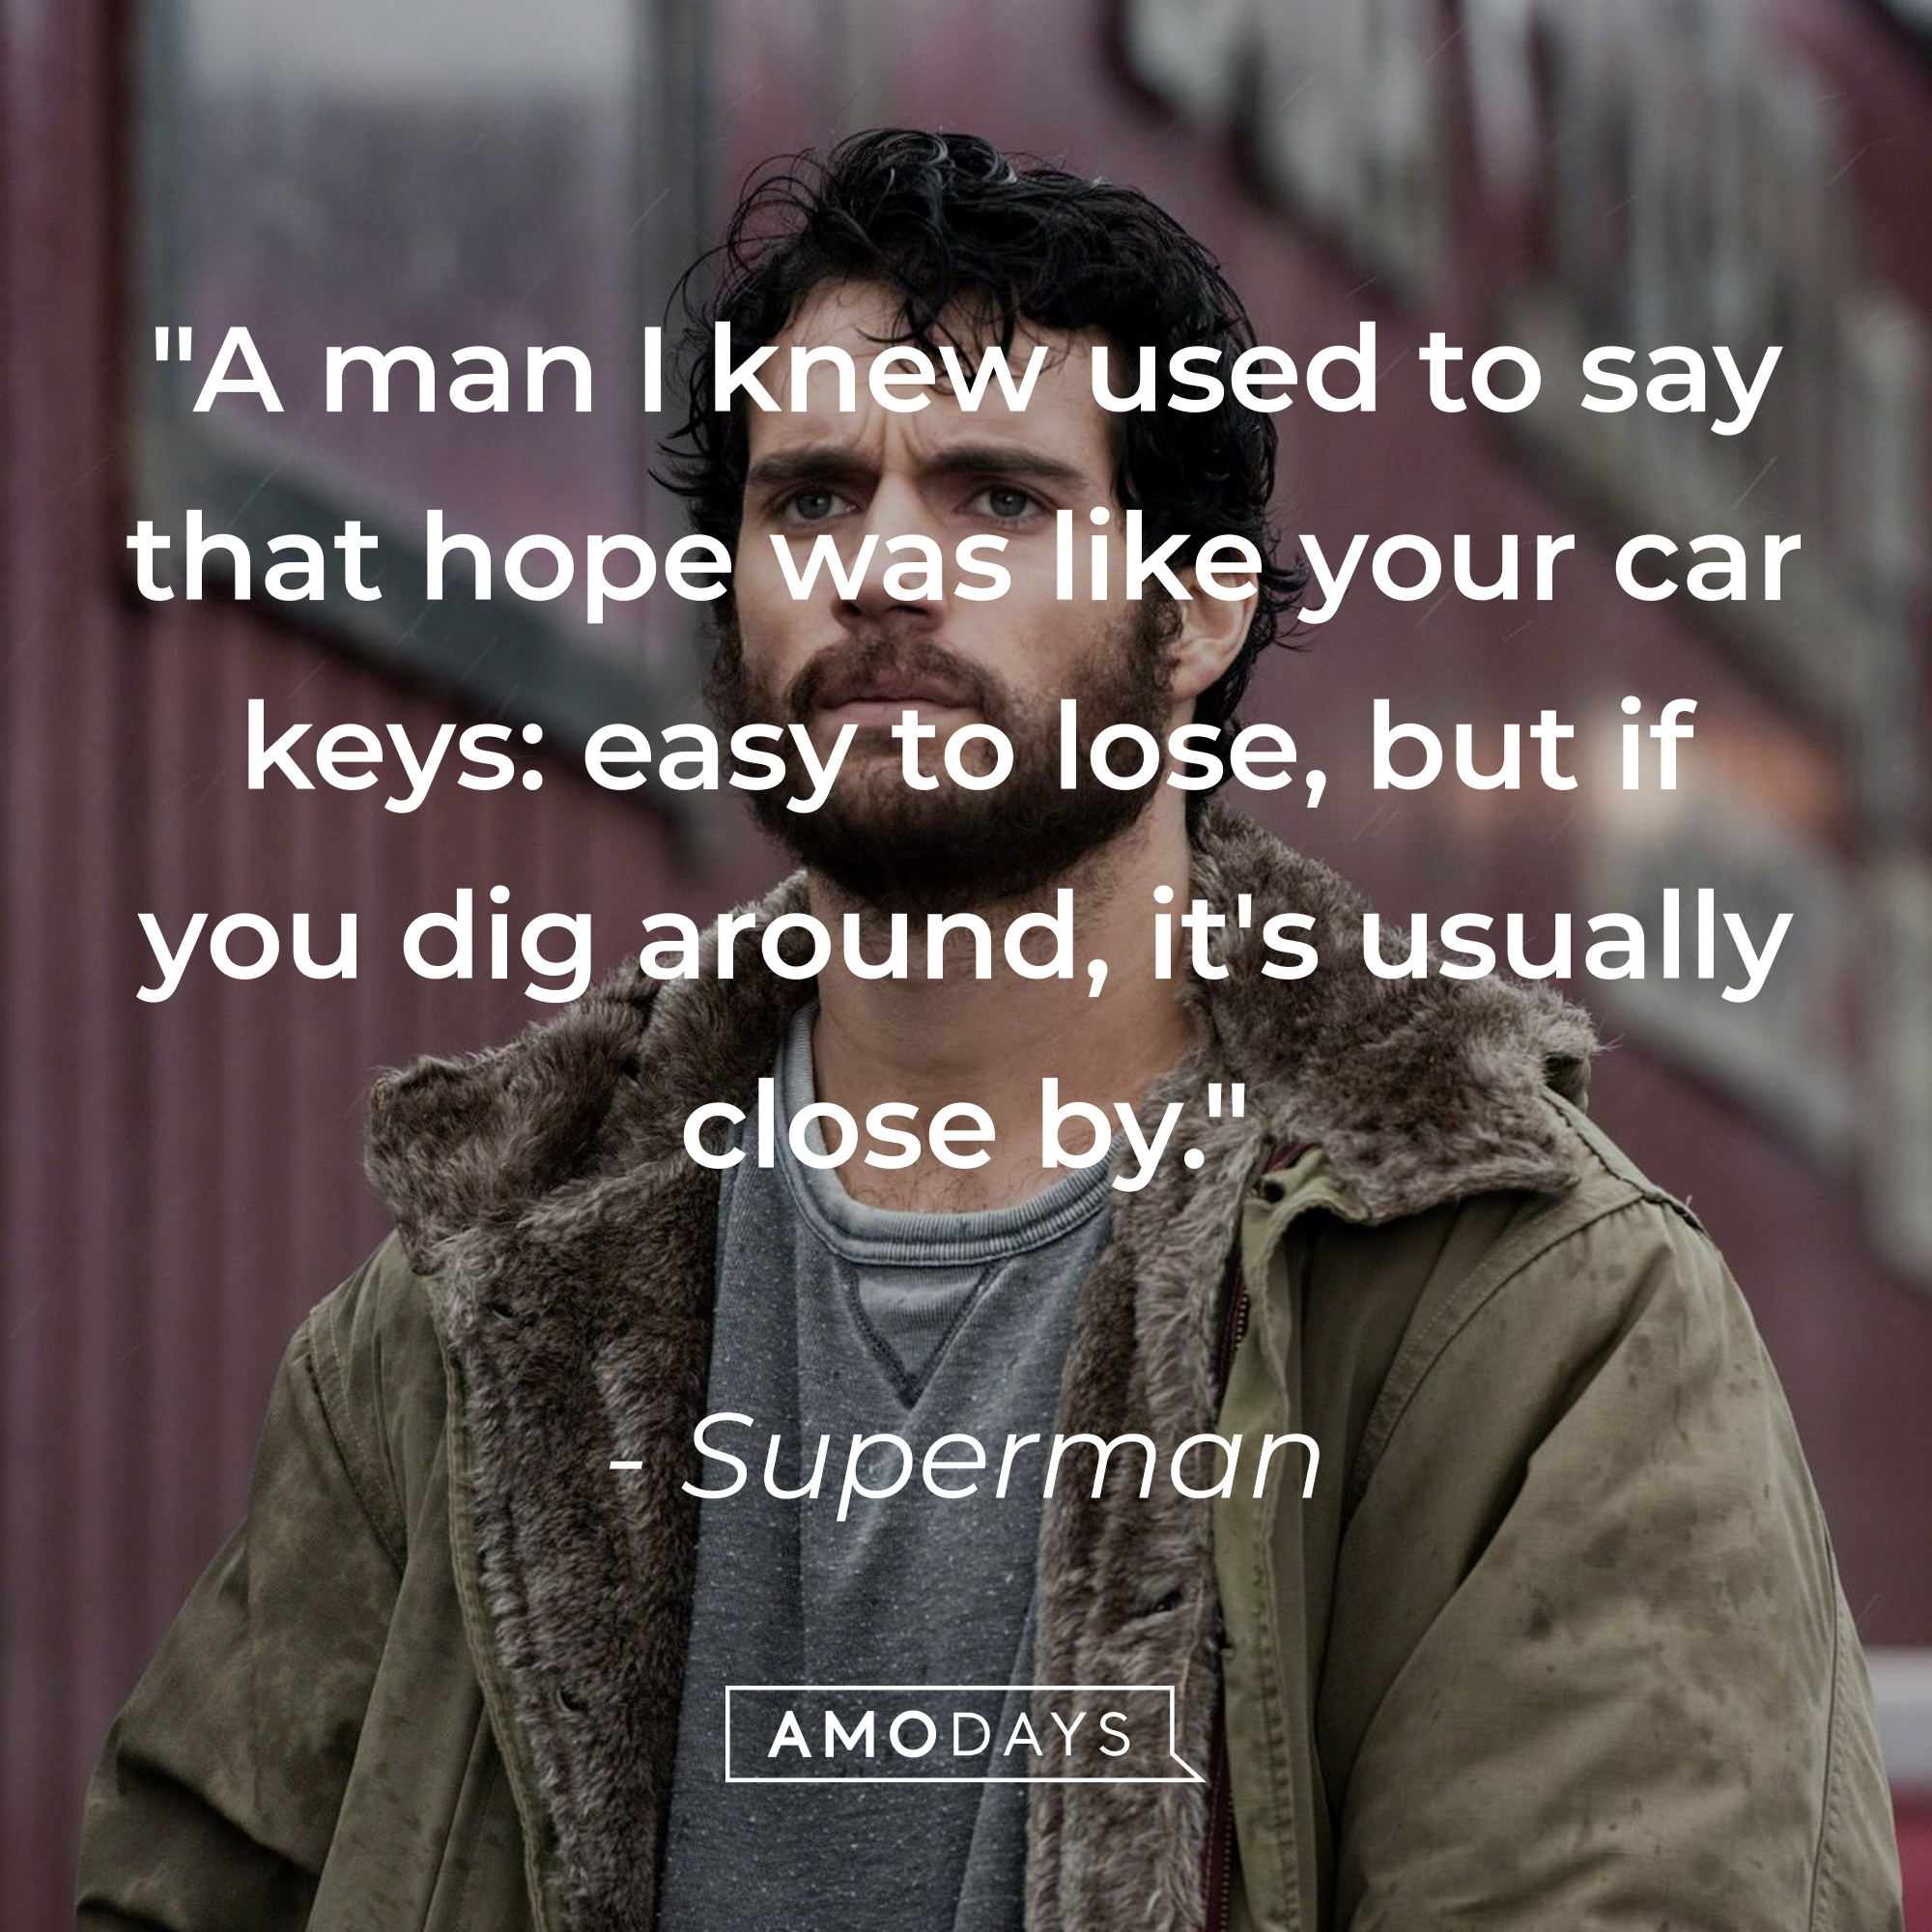 Superman’s quote: "A man I knew used to say that hope was like your car keys: easy to lose, but if you dig around, it's usually close by." | Source: Facebook/manofsteel